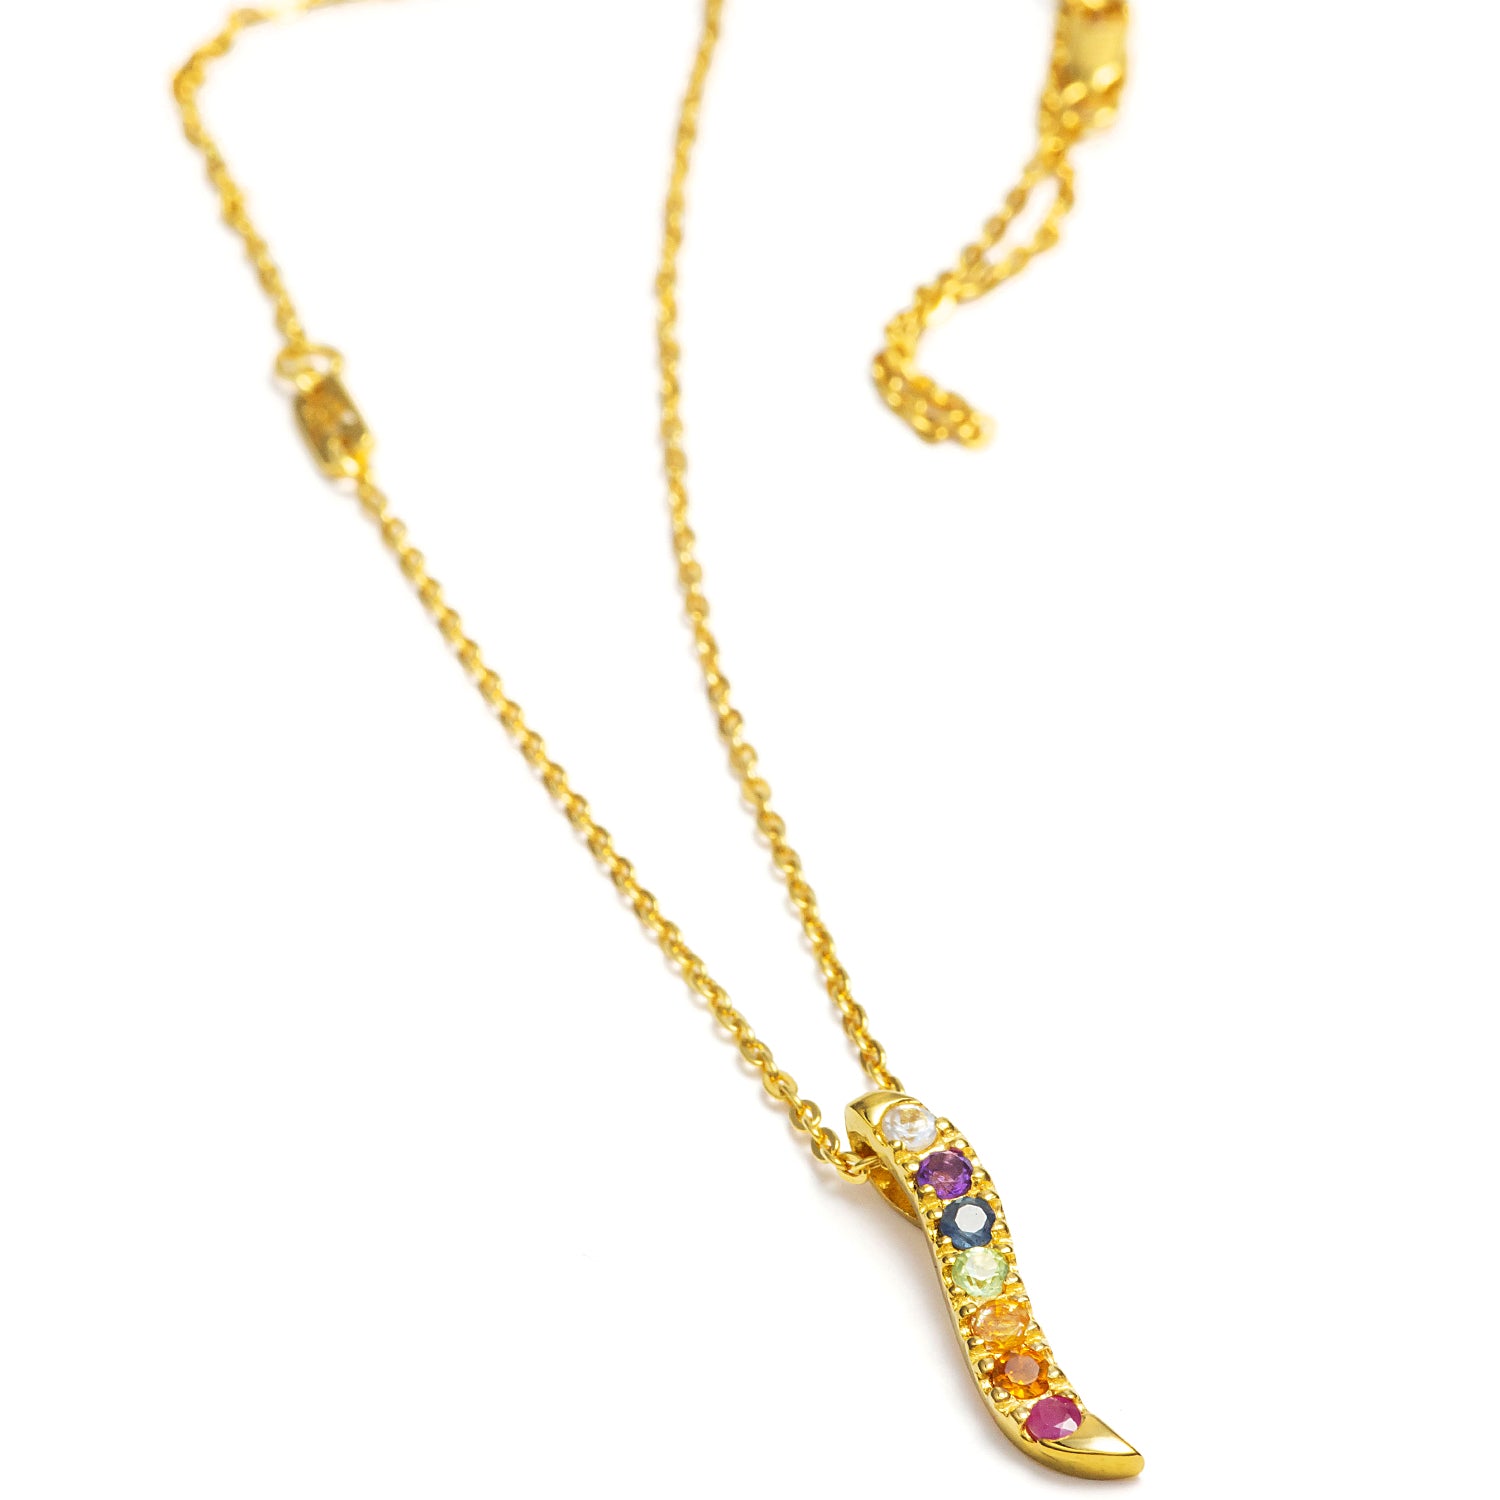 Chakra Flow pendant gold plated with 7 gemstones from ETERNAL BLISS - Spiritual jewelry